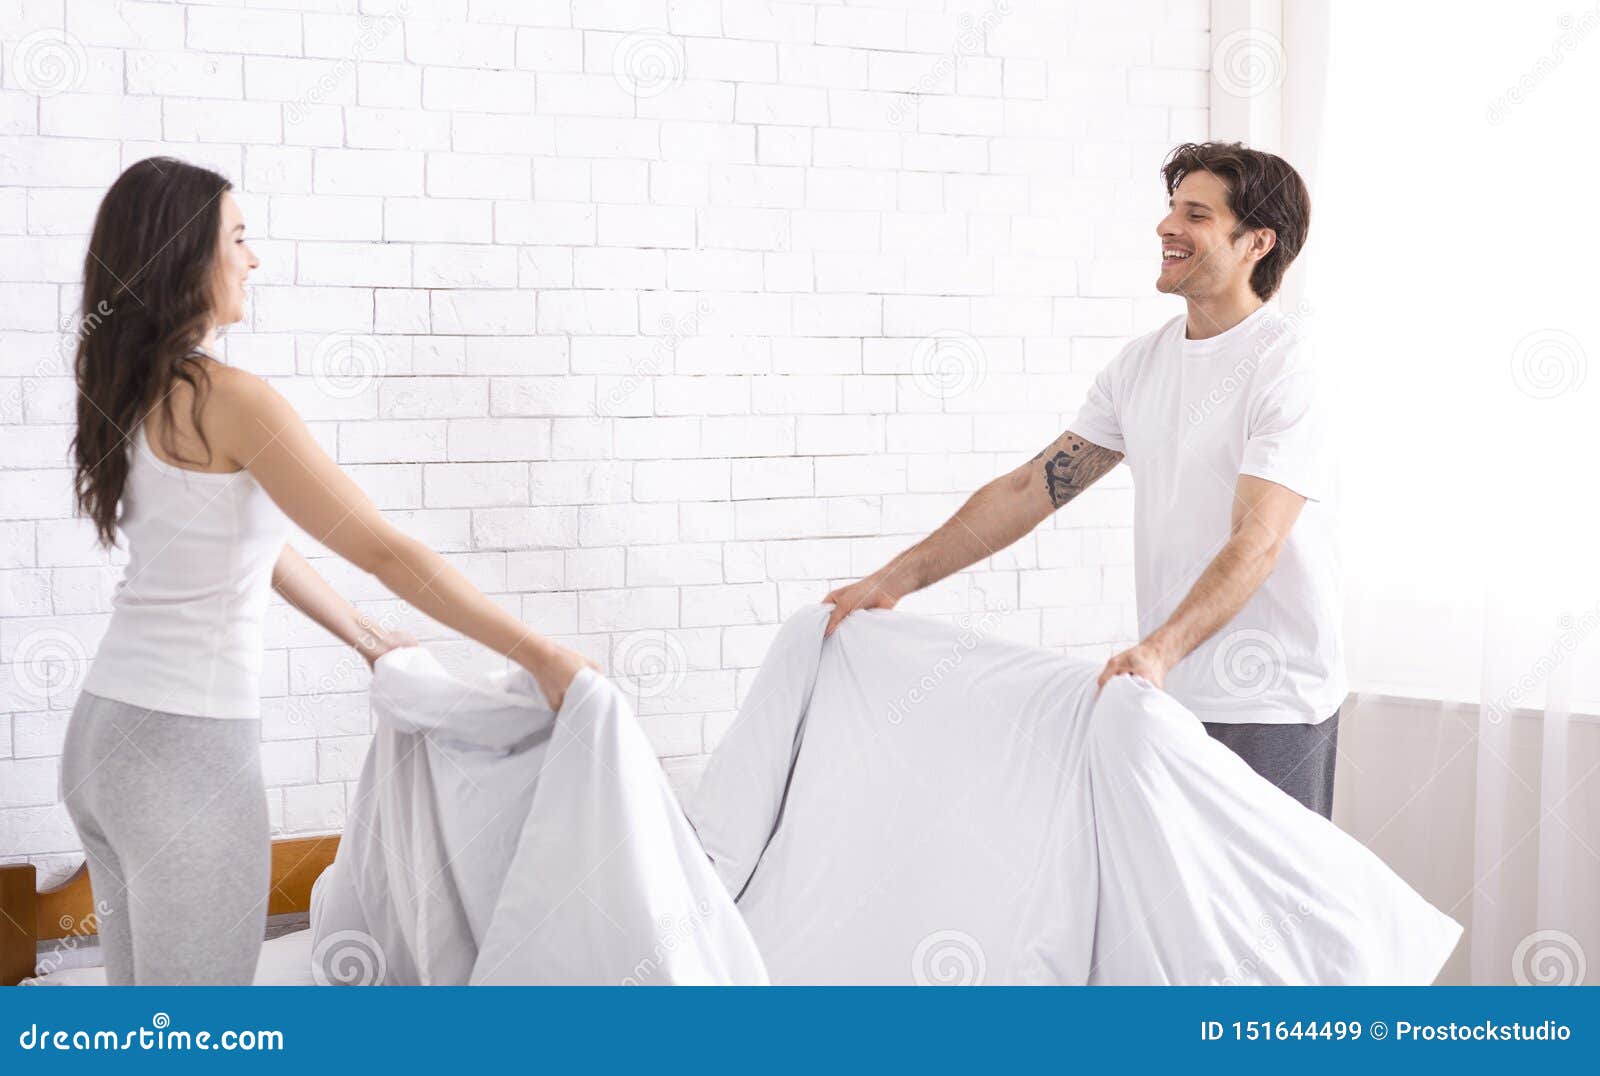 Charming Couple In Love Making Bed Together Stock Image Image Of